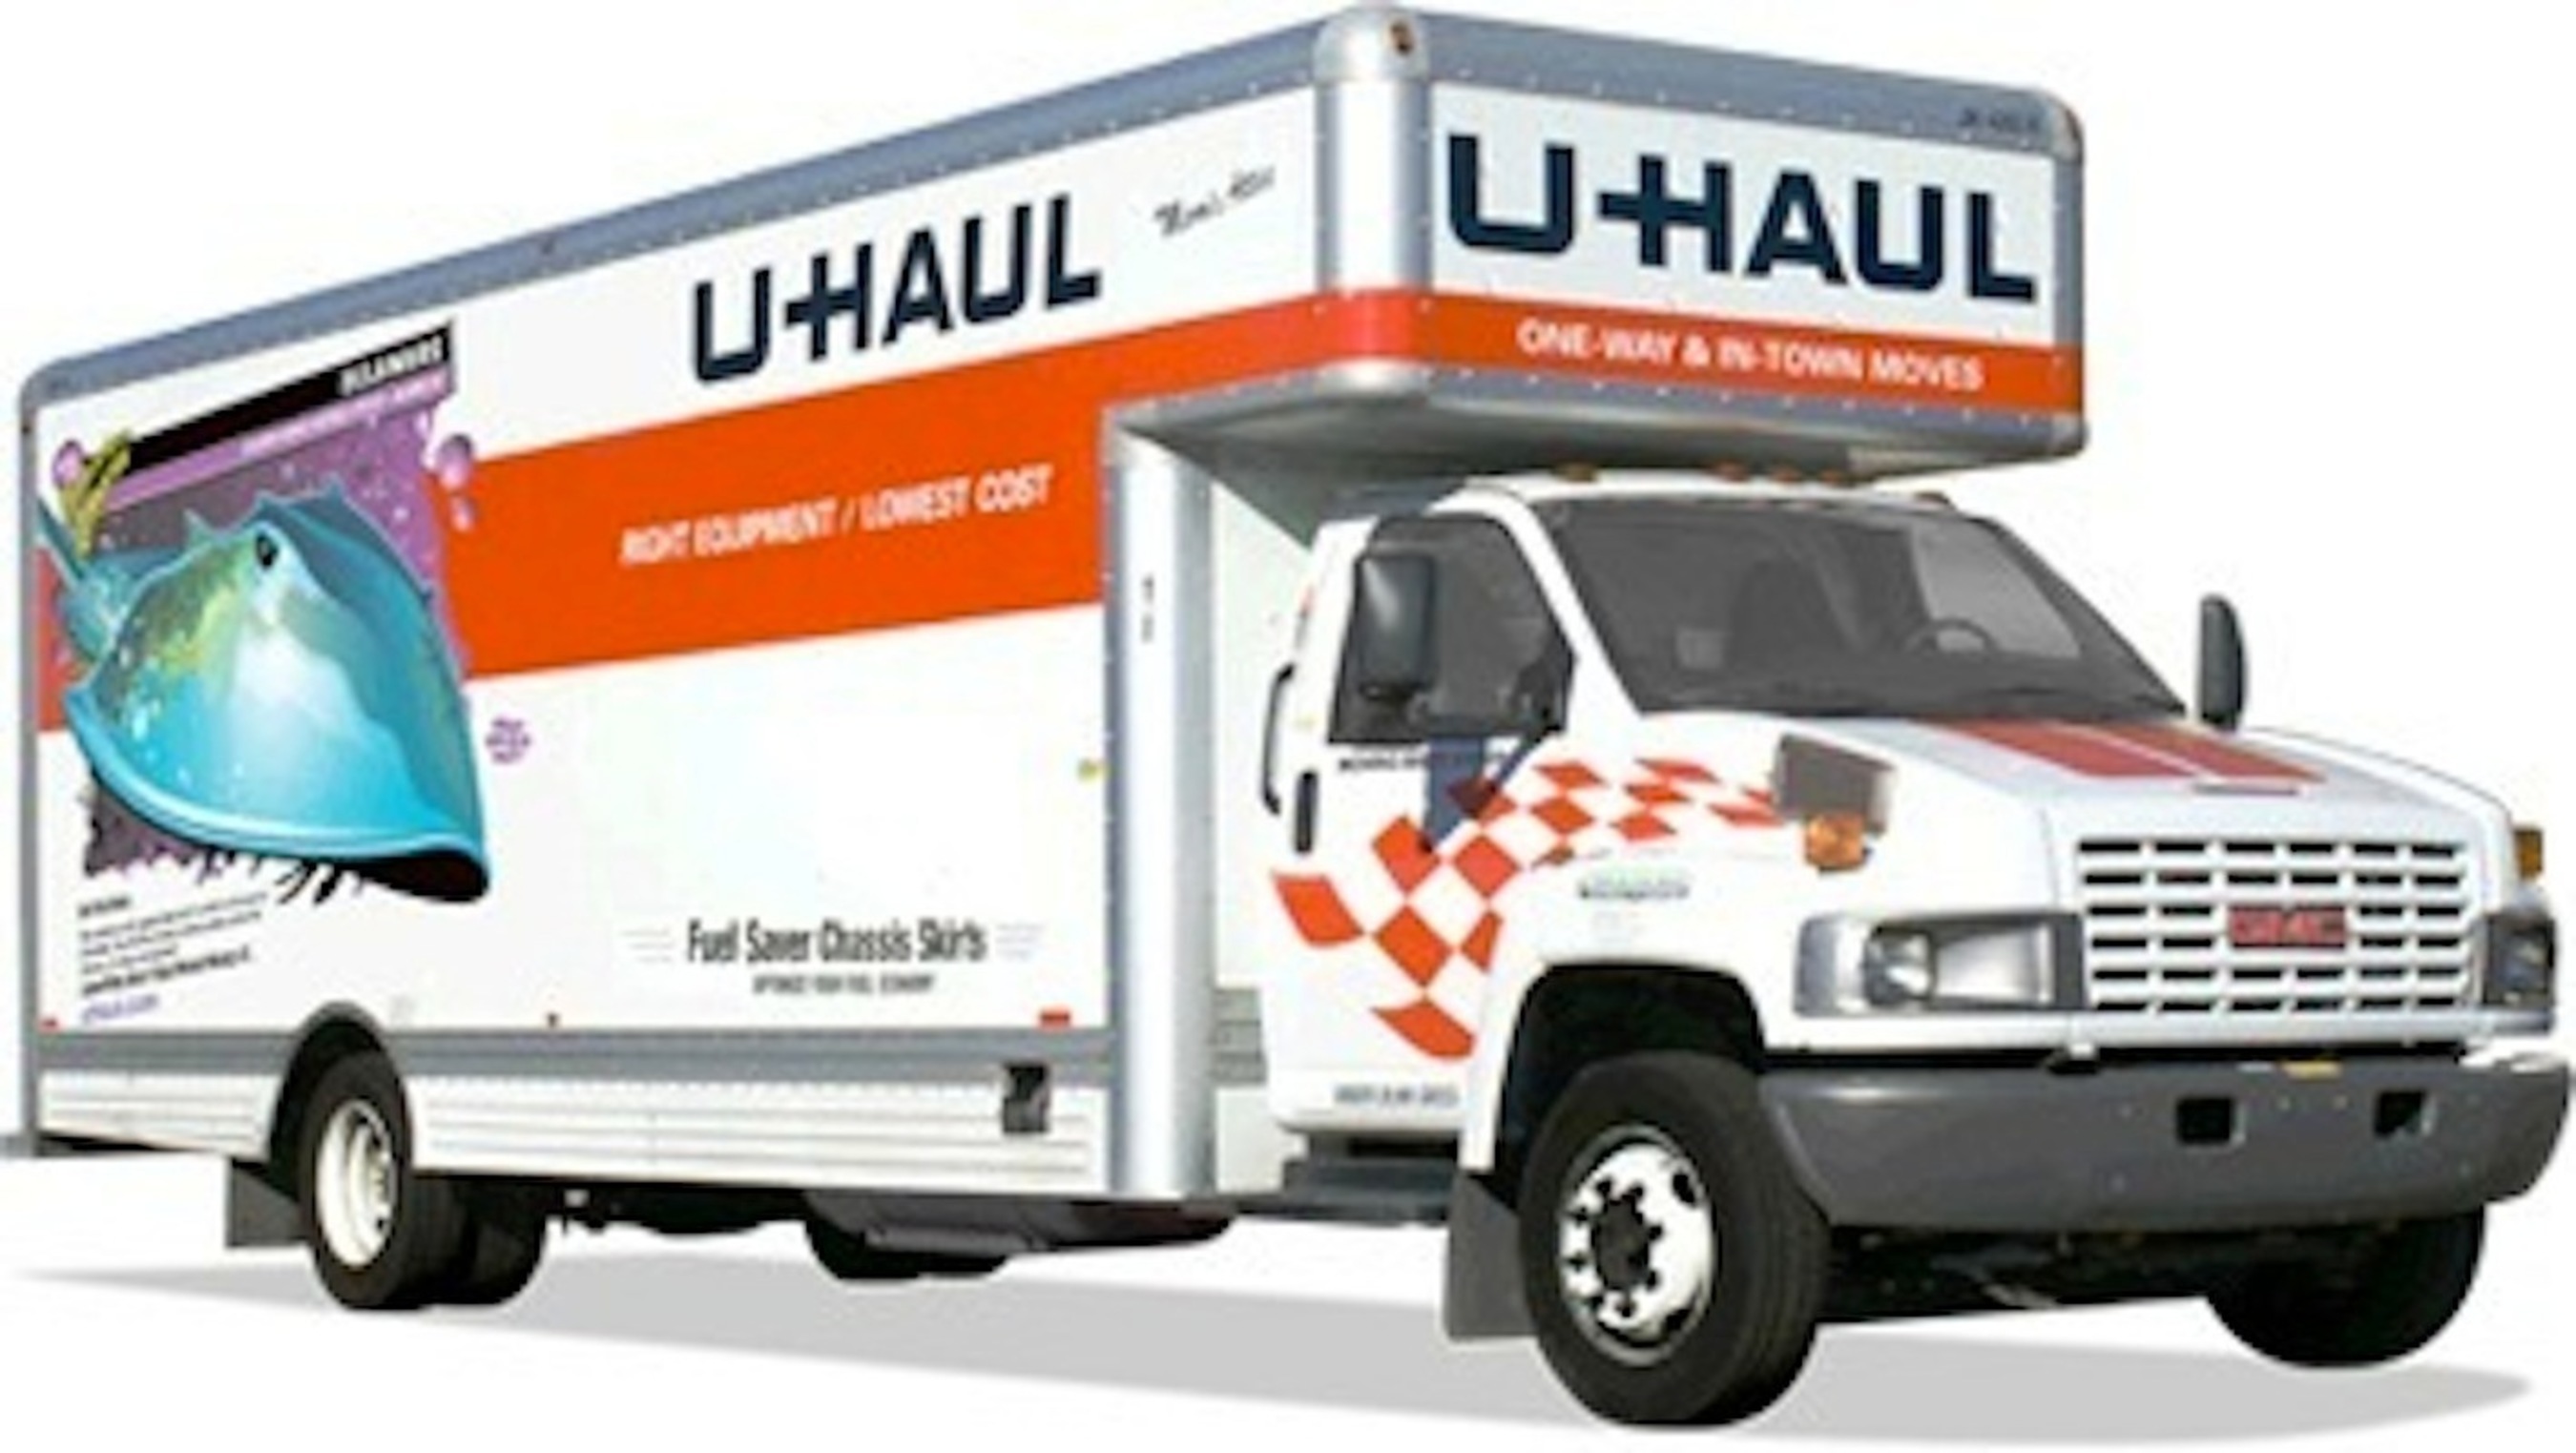 The Battery Exchange LLC. Gets a Spark With the Addition of U-Haul to Its Business (PRNewsFoto/U-Haul)